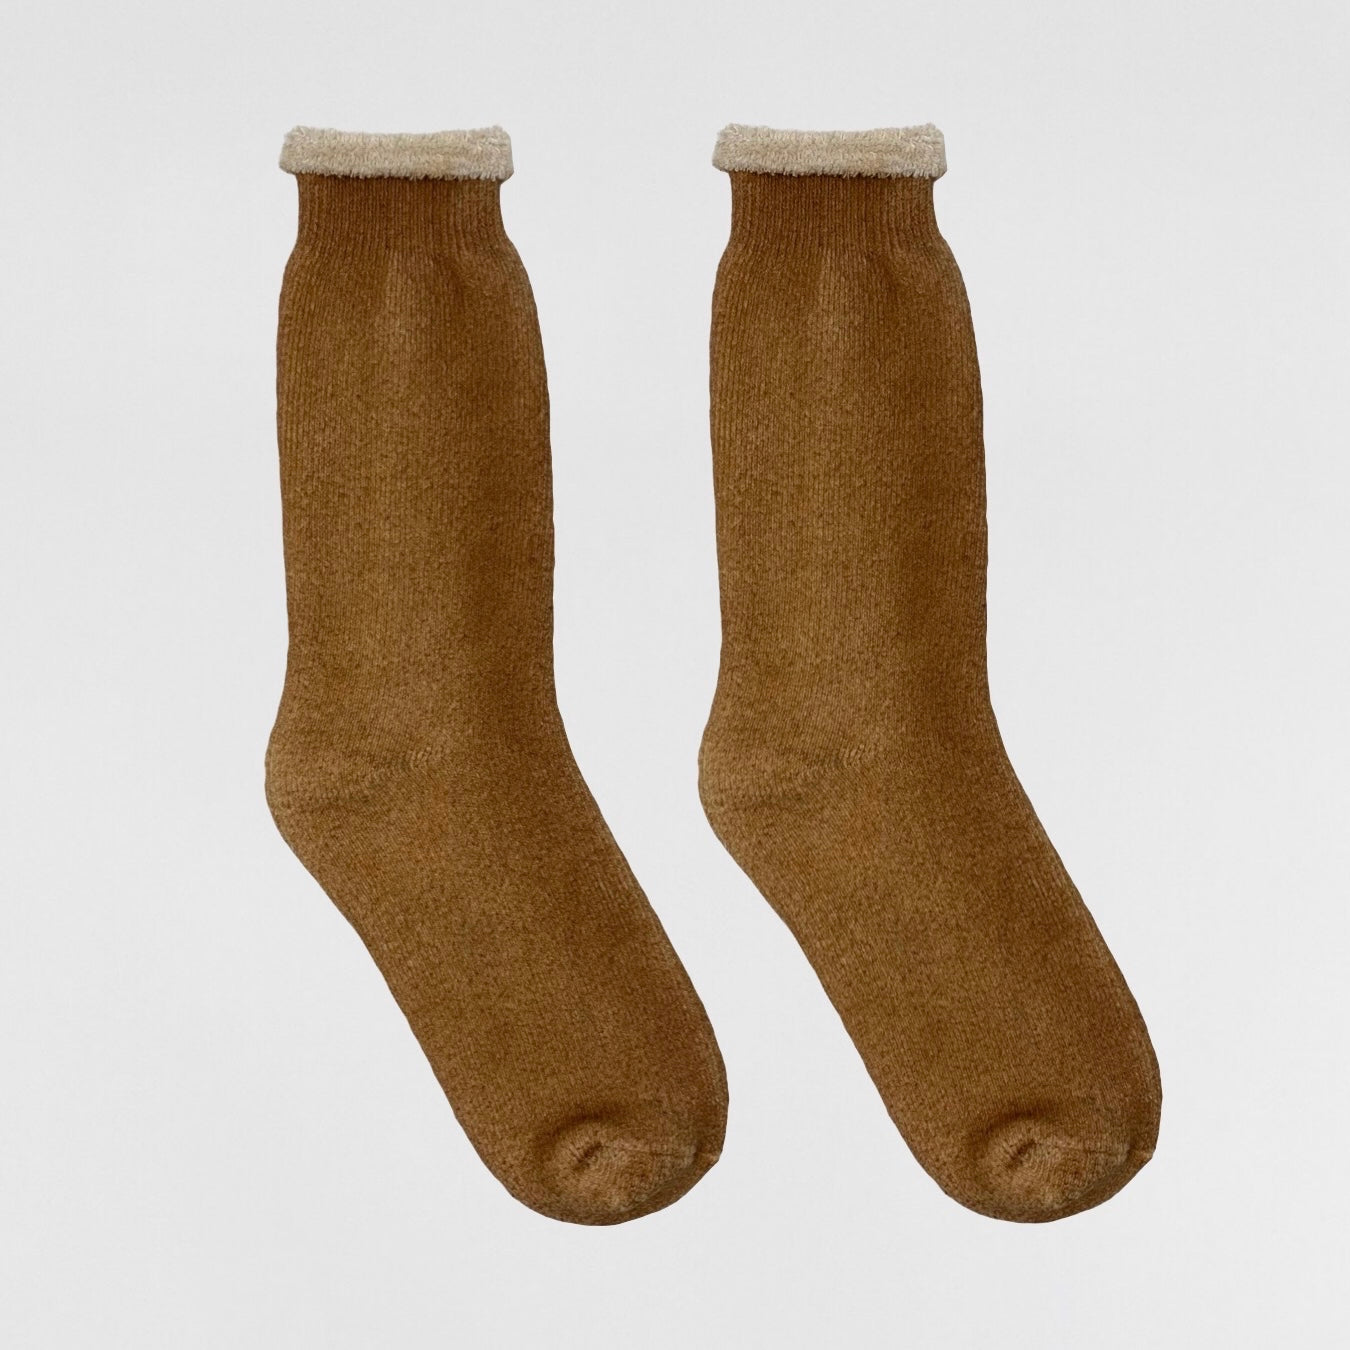 YZY 2020 Unreleased Wyoming Two Tone Bouclette Sample Socks